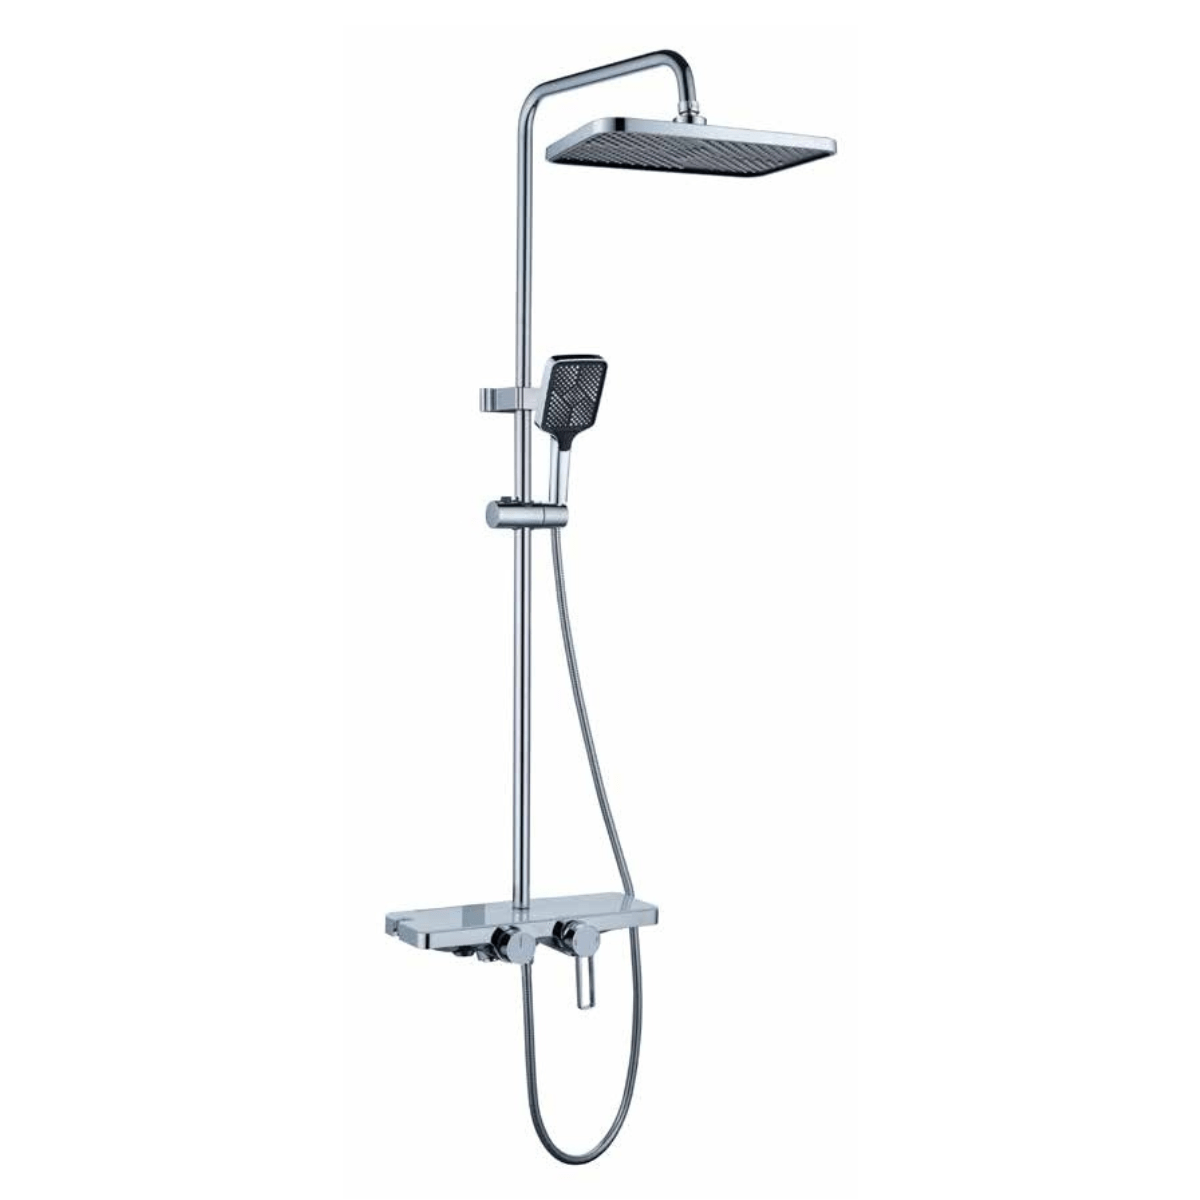 Buy WK Bathroom Chrome Wall Mounted Four-Function Square Rain Shower Set - K-8849 | Shop at Supply Master Accra, Ghana Shower Set Buy Tools hardware Building materials